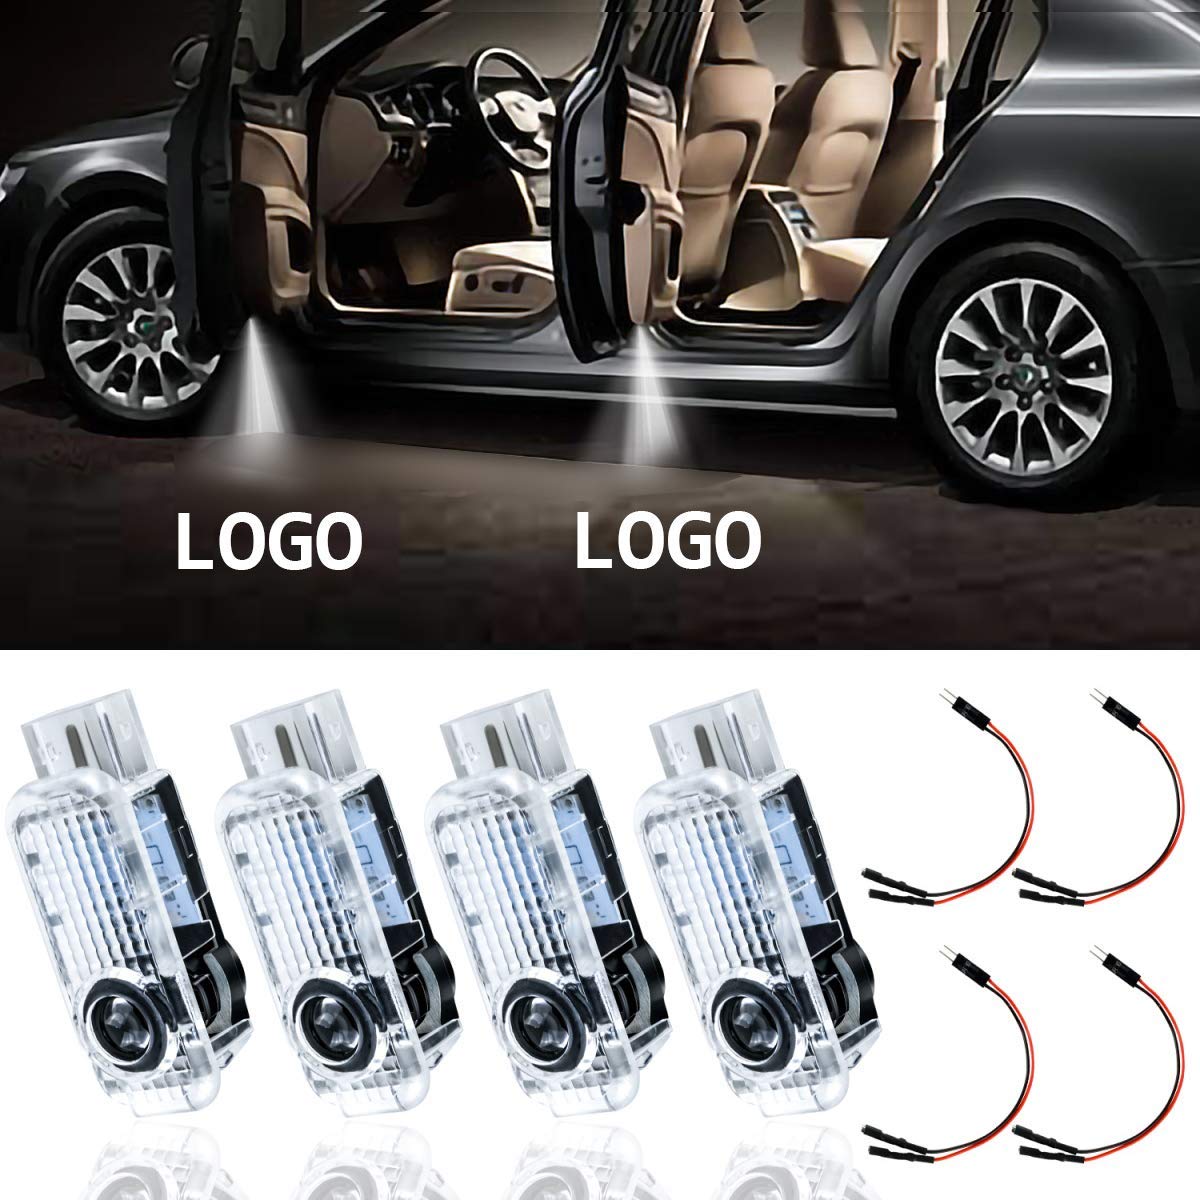 Car Logo Door Ghosts Shadow LED Laser Projector Light for sale in